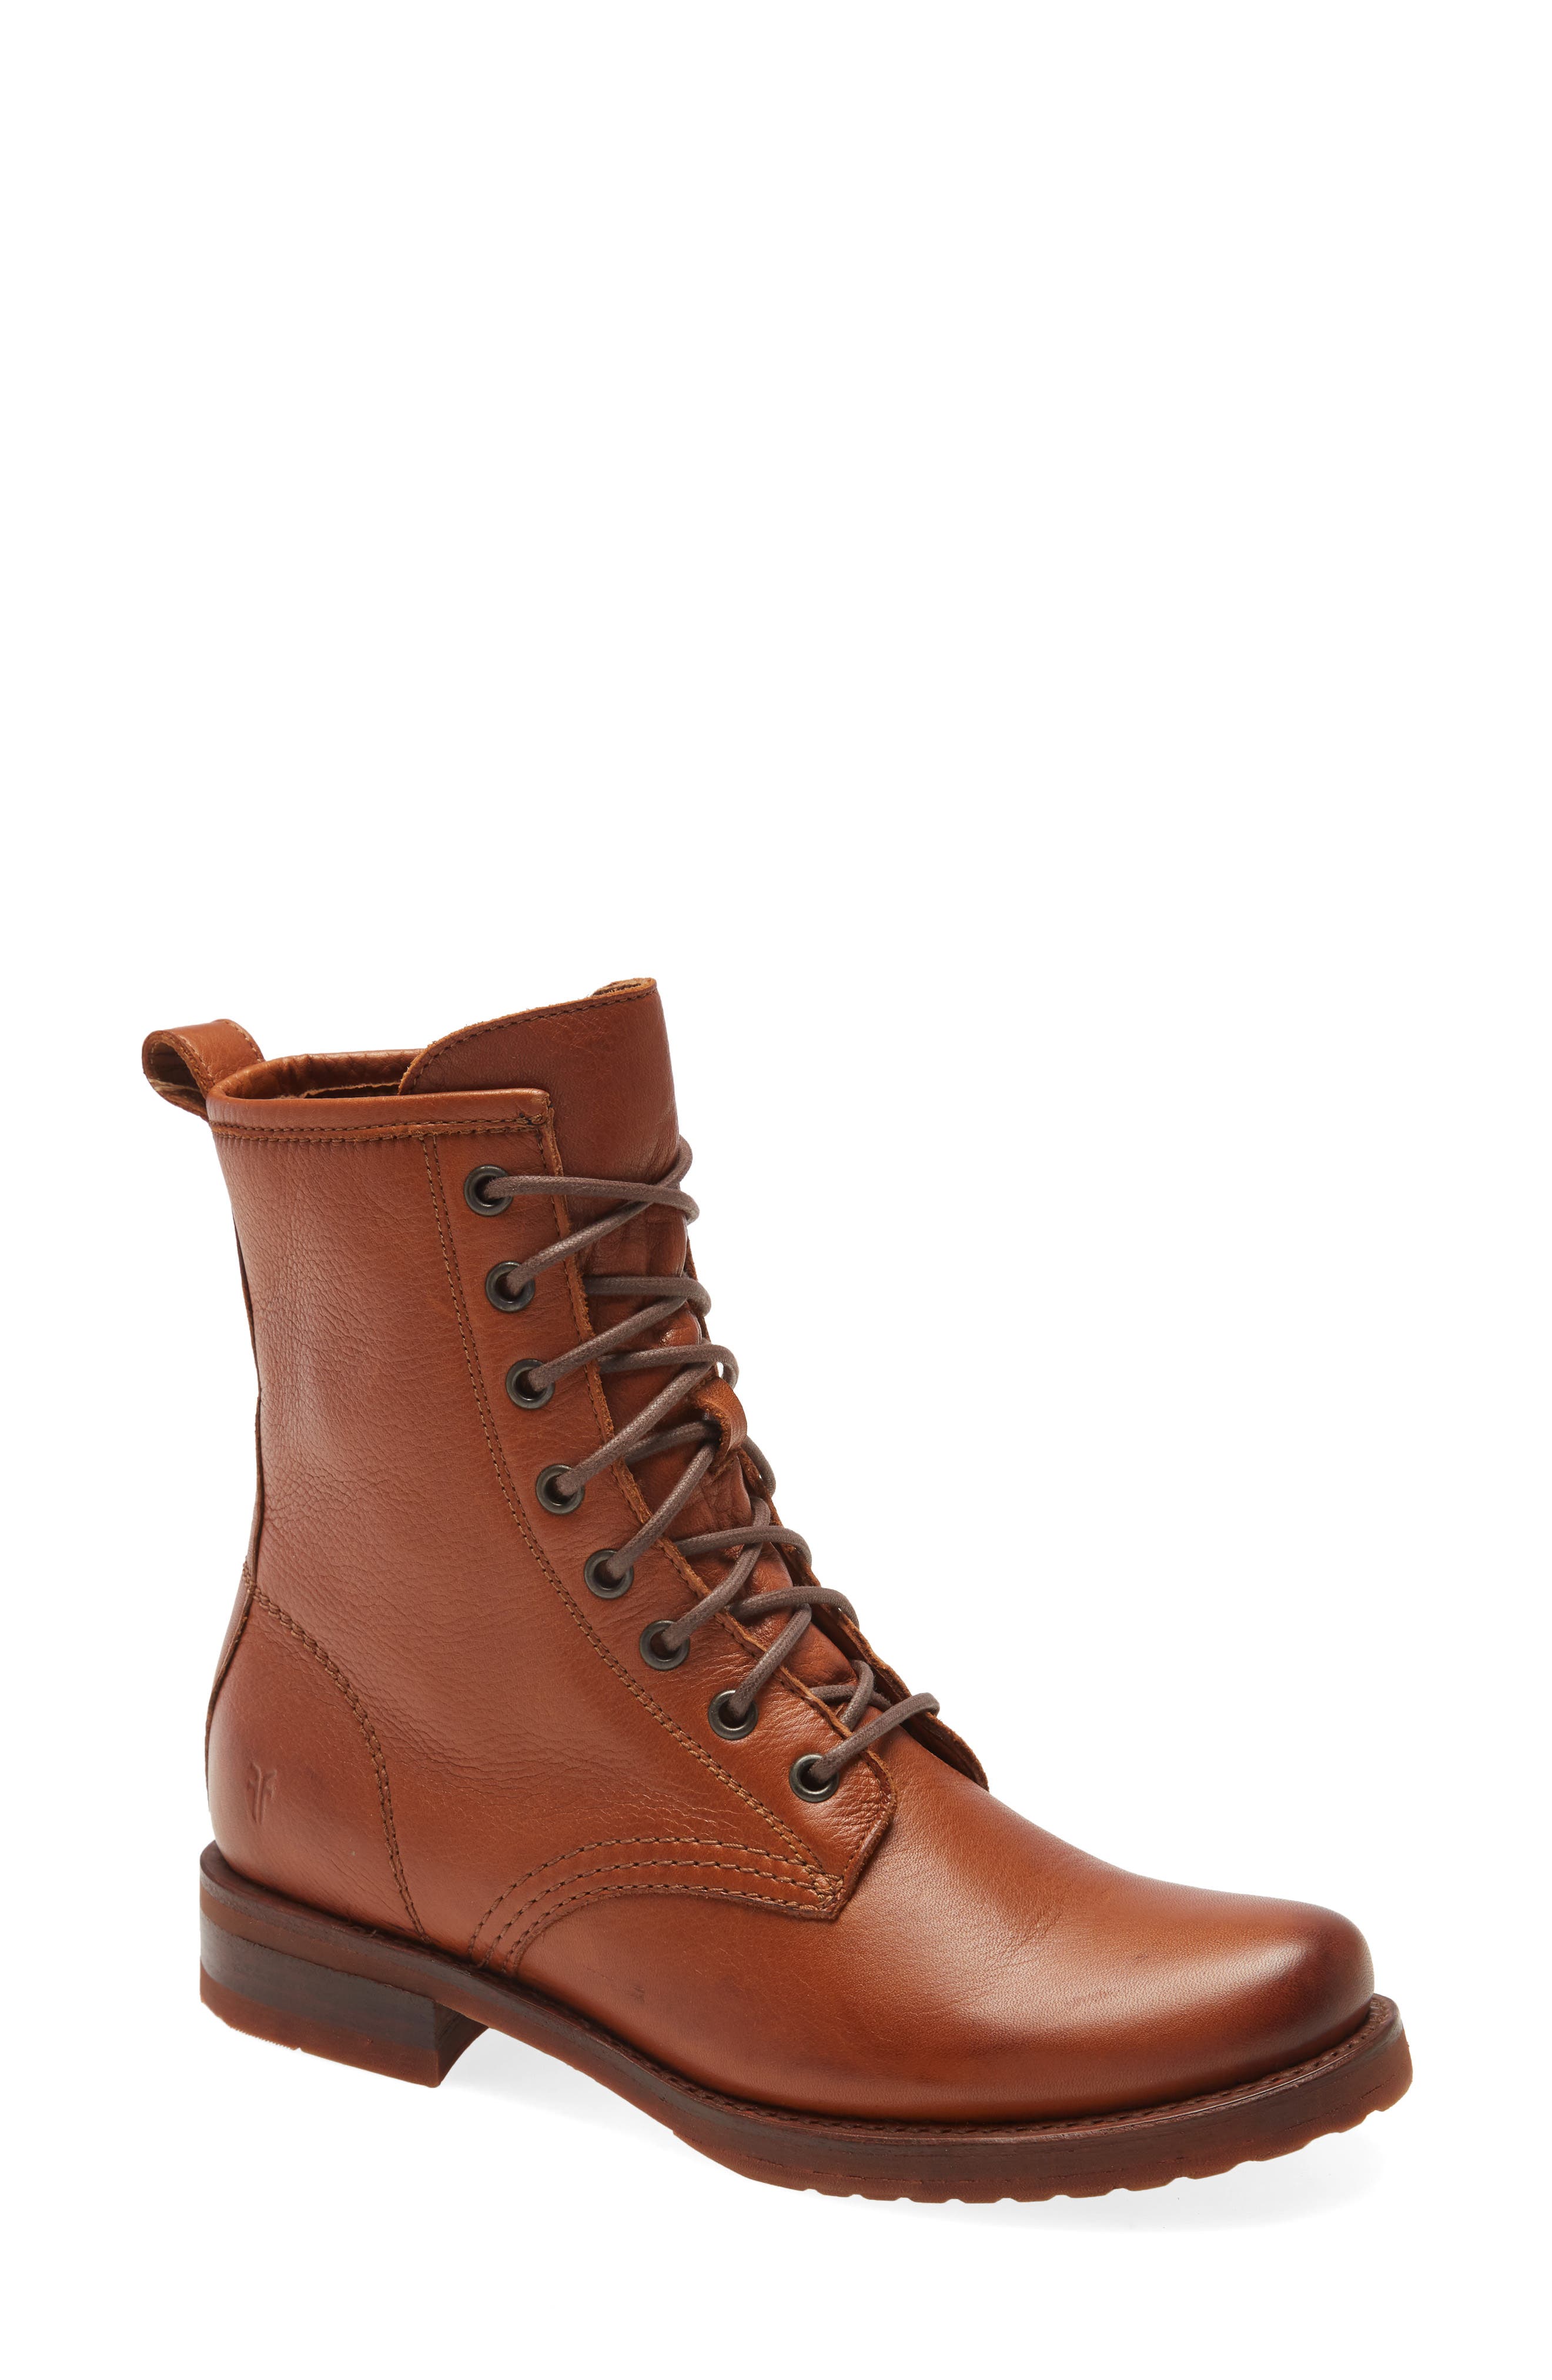 nordstrom frye boots womens